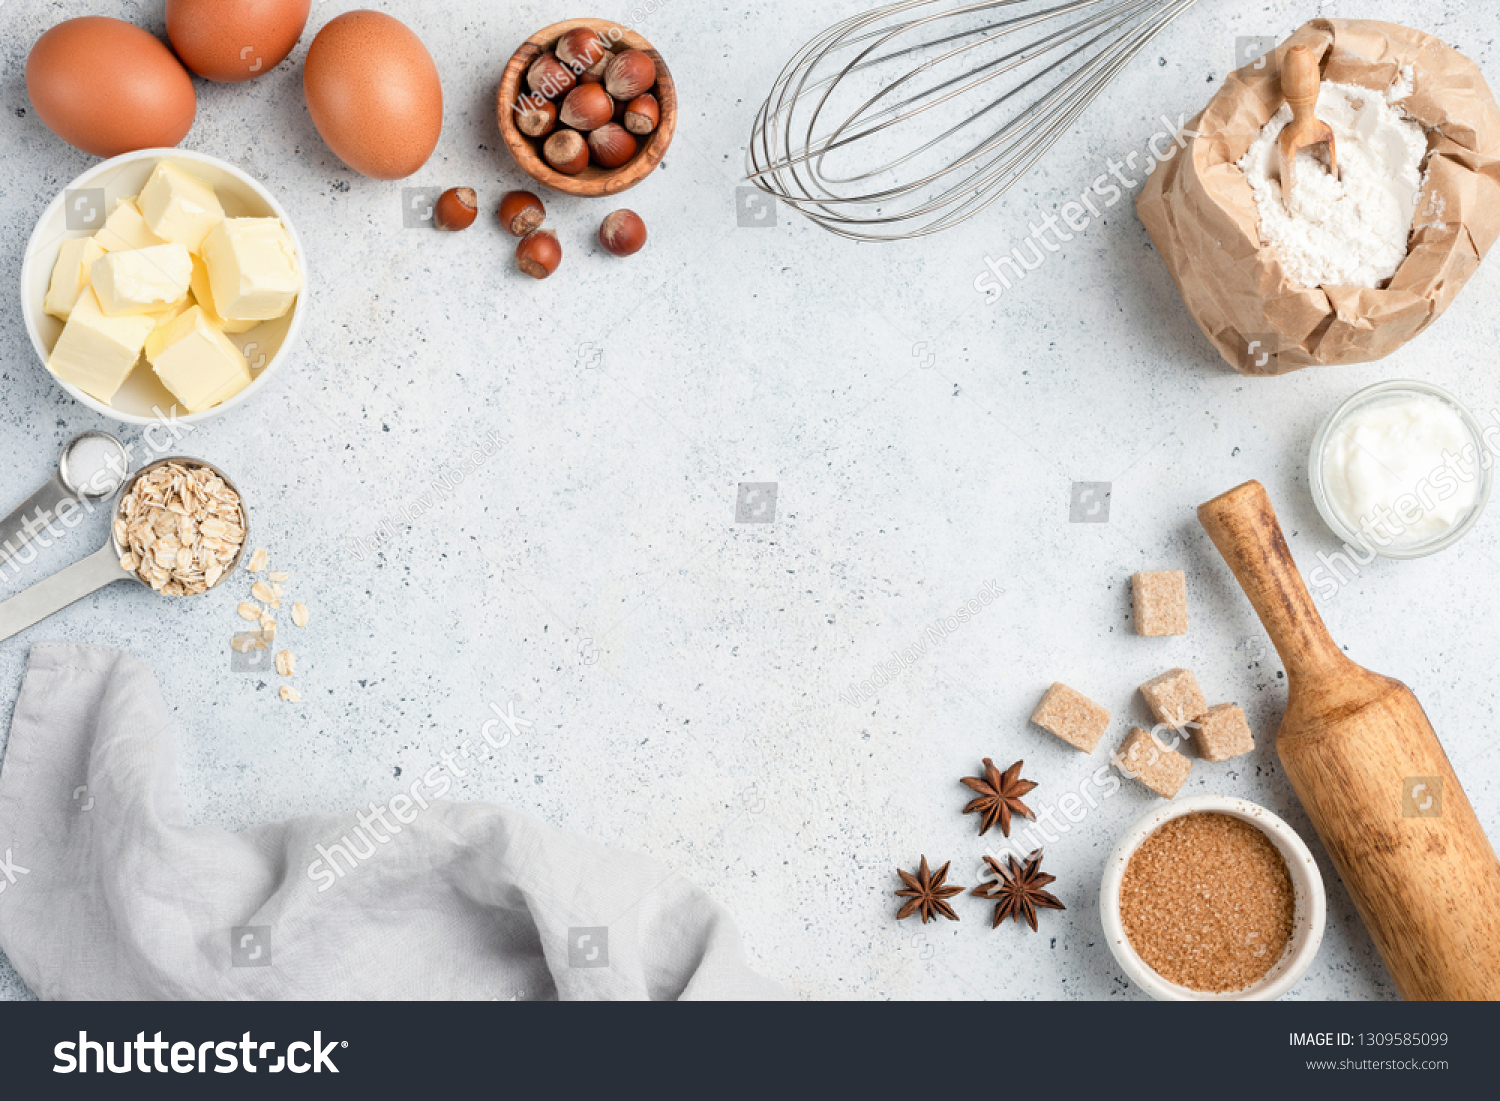 Baking ingredients and utensils on concrete background. Cooking or baking cake, cookies, pastry or bread concept. Top view with copy space for text, recipe, menu #1309585099